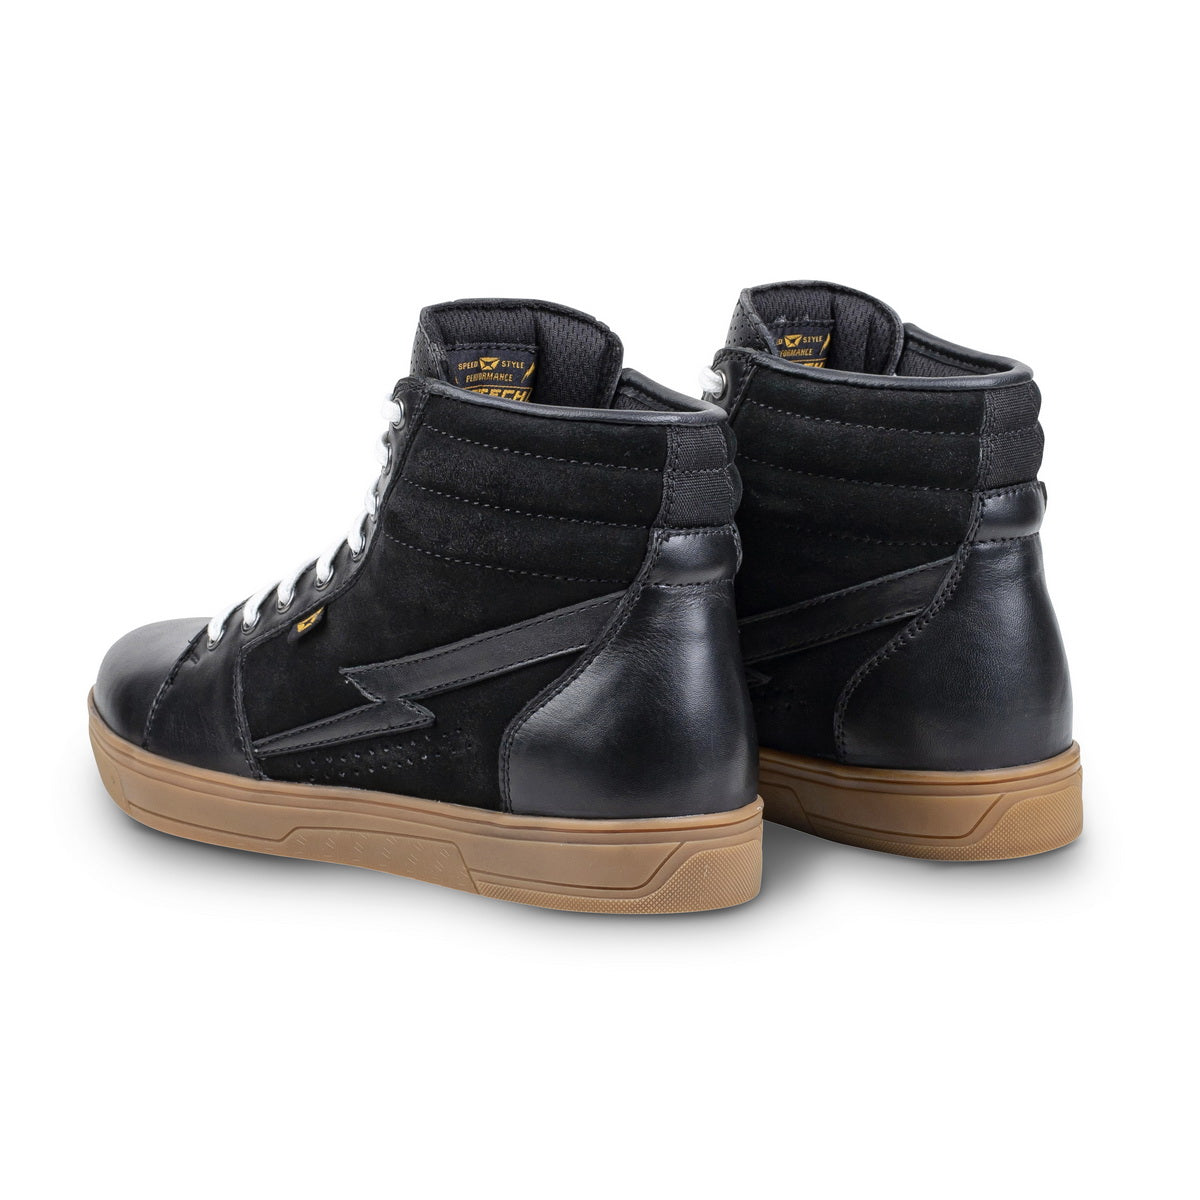 Cortech ‘The Slayer’ Mens Black and Gum Casual Street Style Suede with Leather High-Top Riding Shoe